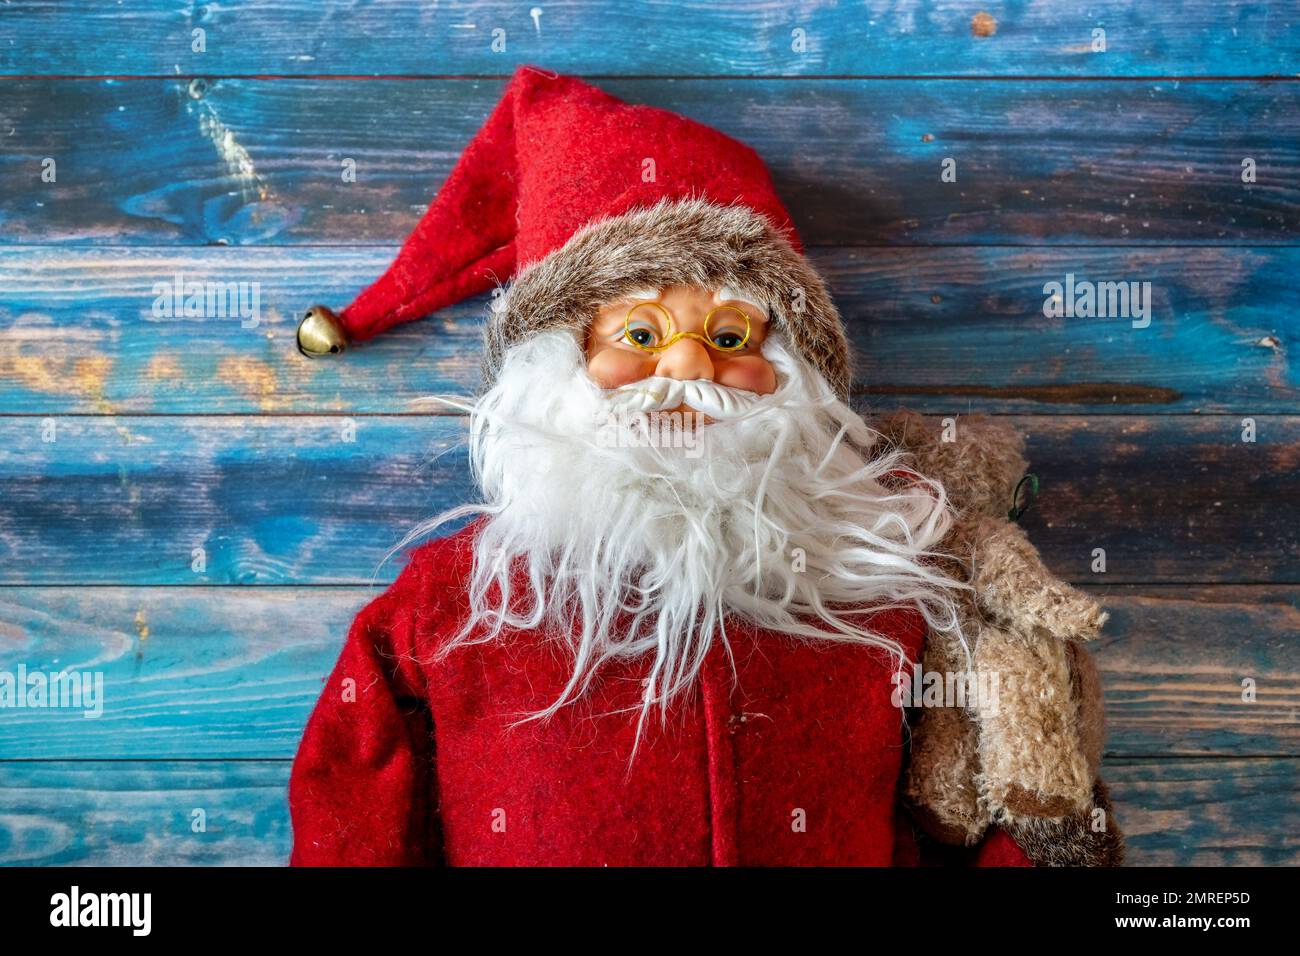 A top view of a cute Christmas Santa Claus toy on a blue wooden surface Stock Photo